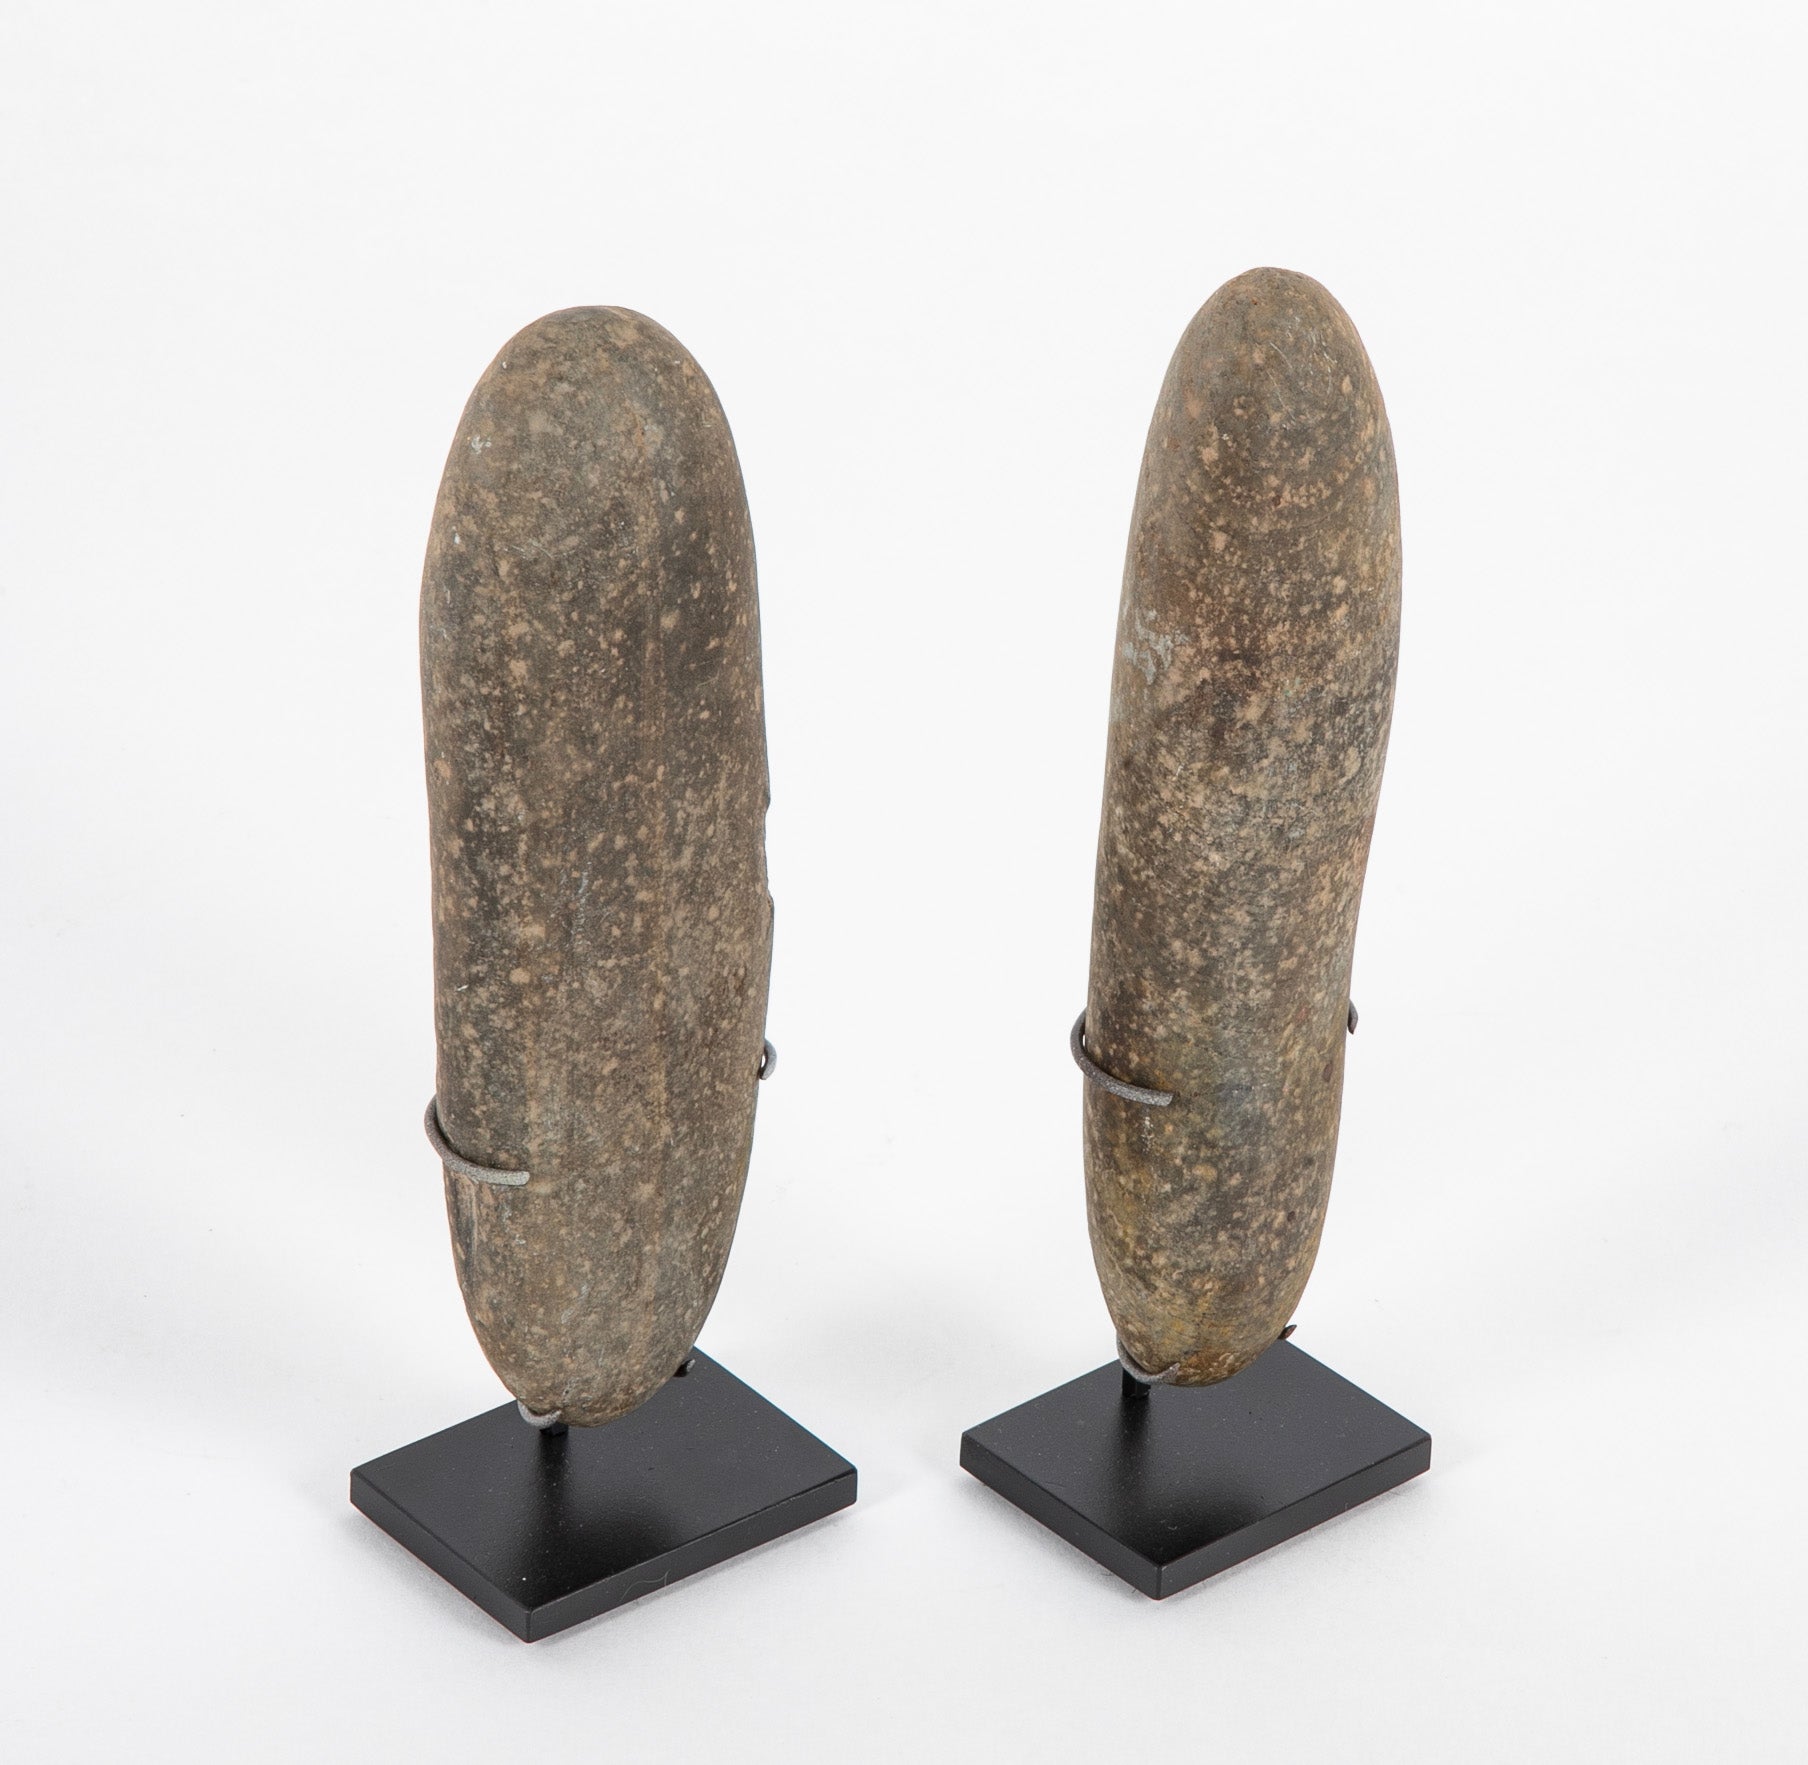 Pair of Neolithic Basalt Stone Celts, Great Britain